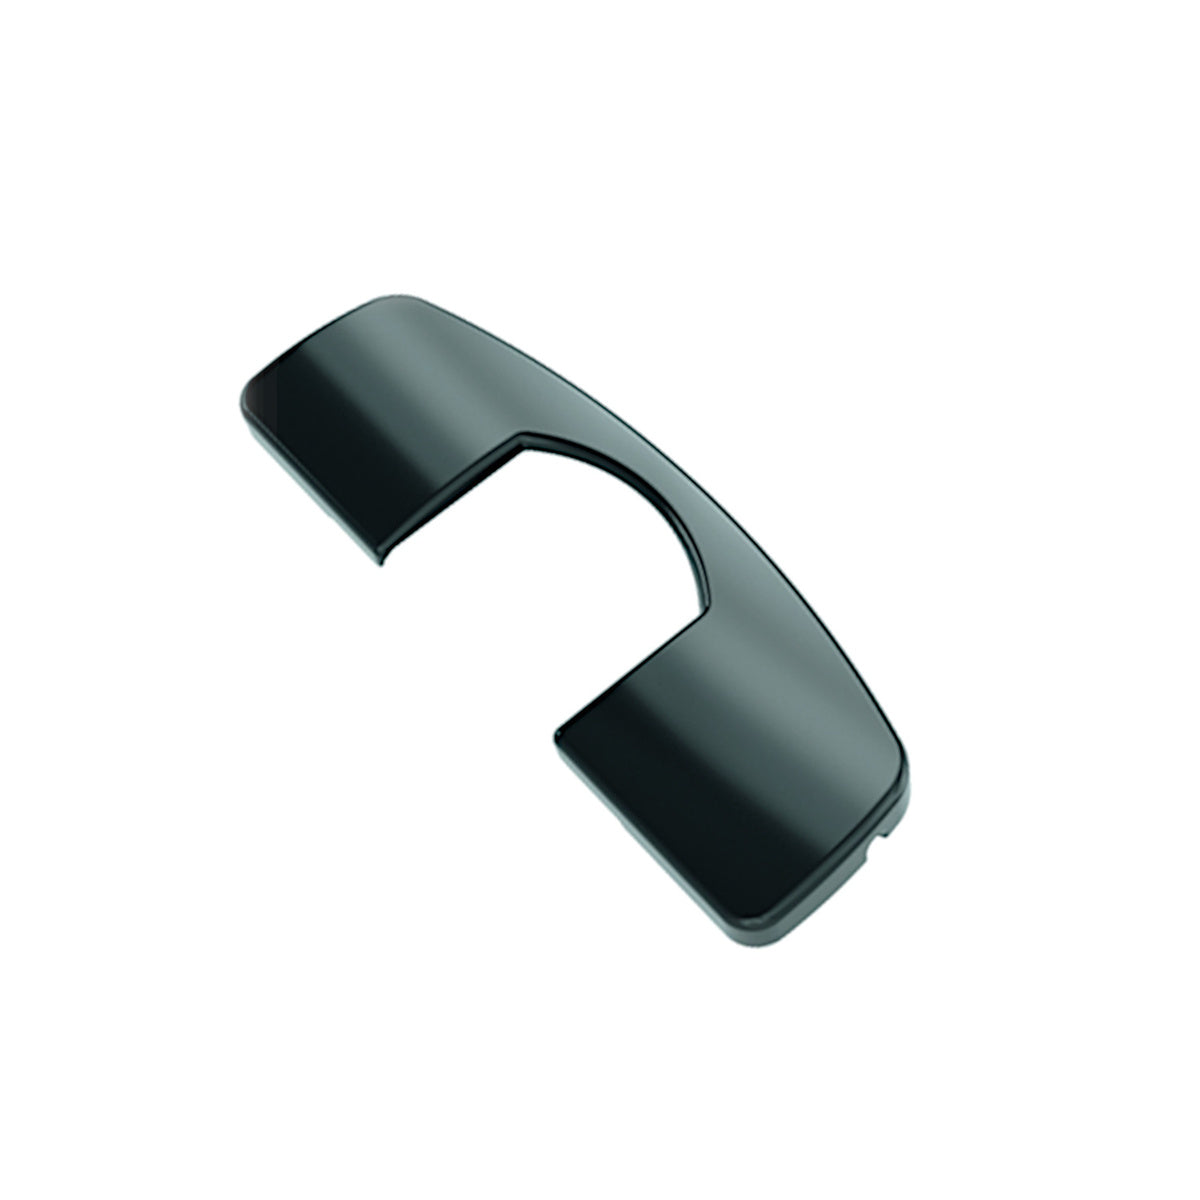 Hettich Cover cap for Sensys hinge arm and cup (embossed with Hettich logo) obsidian black